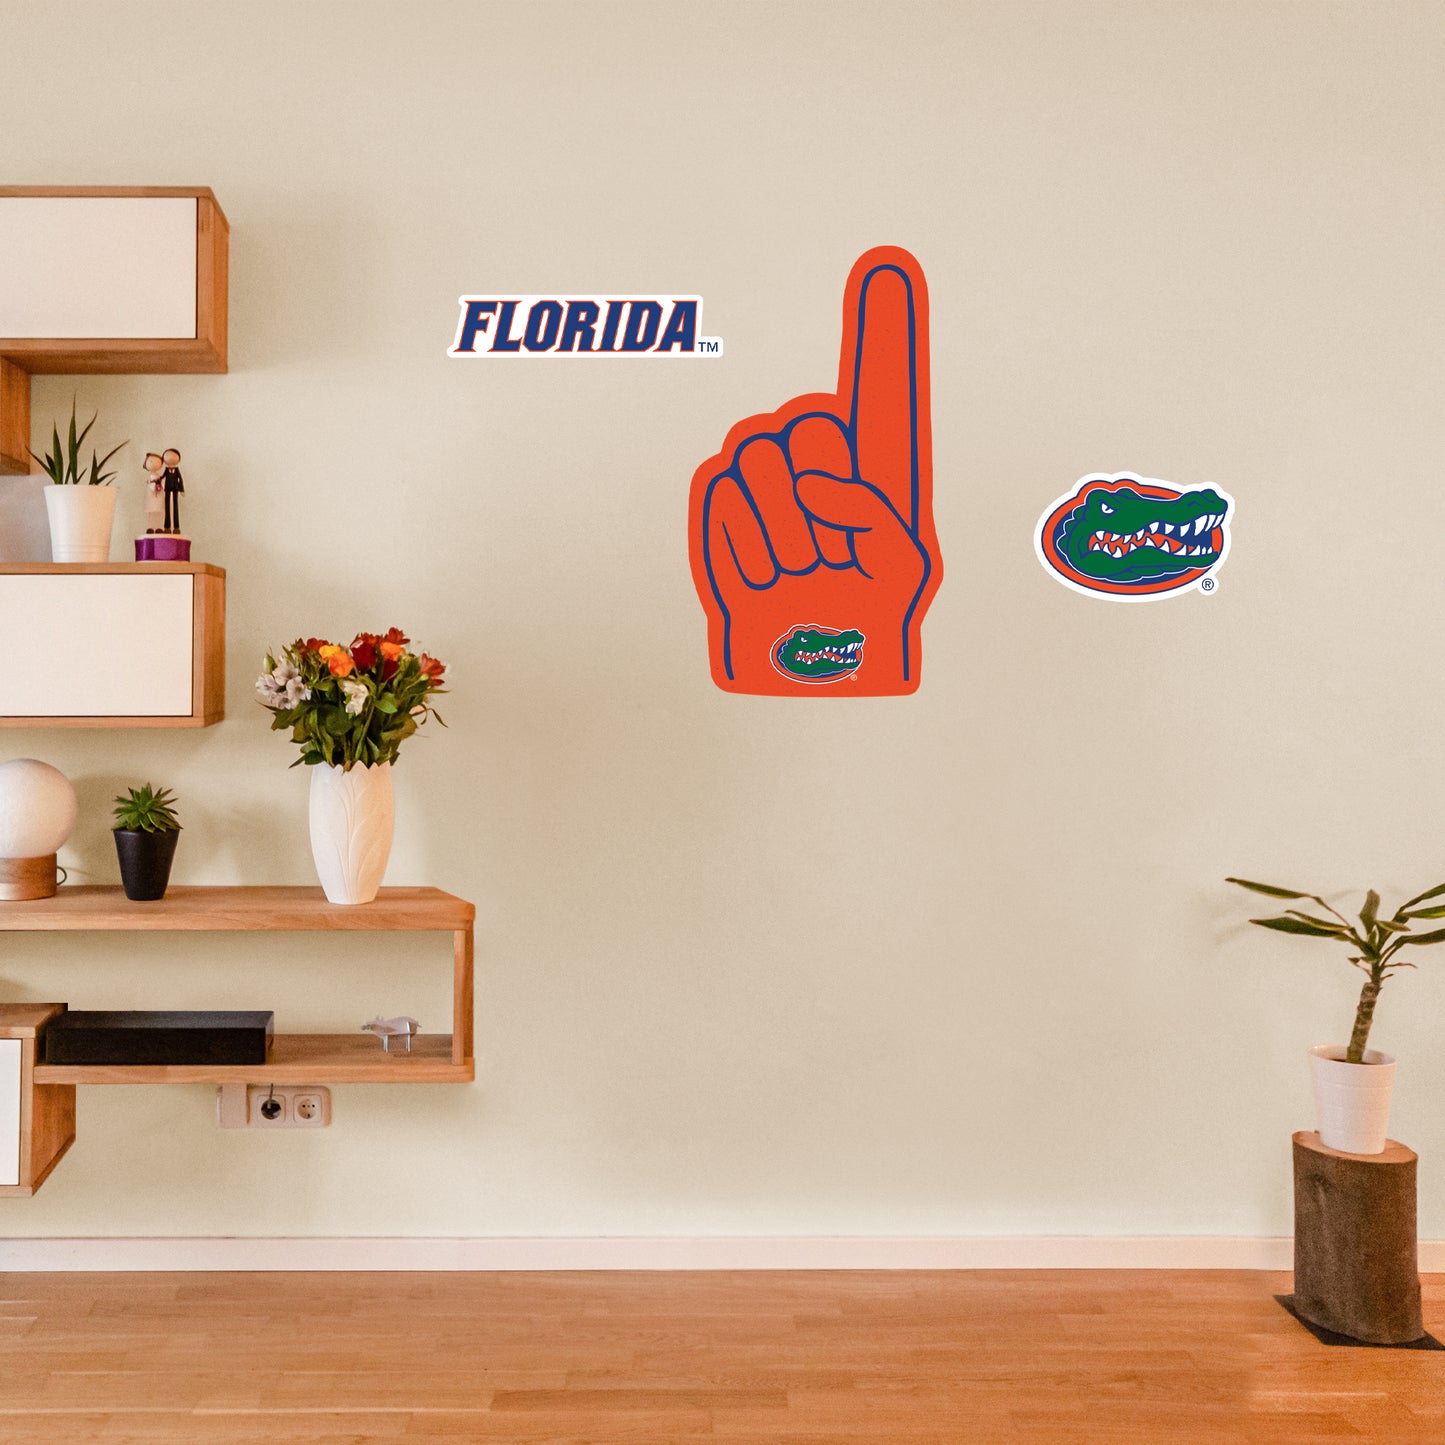 Florida Gators:    Foam Finger        - Officially Licensed NCAA Removable     Adhesive Decal